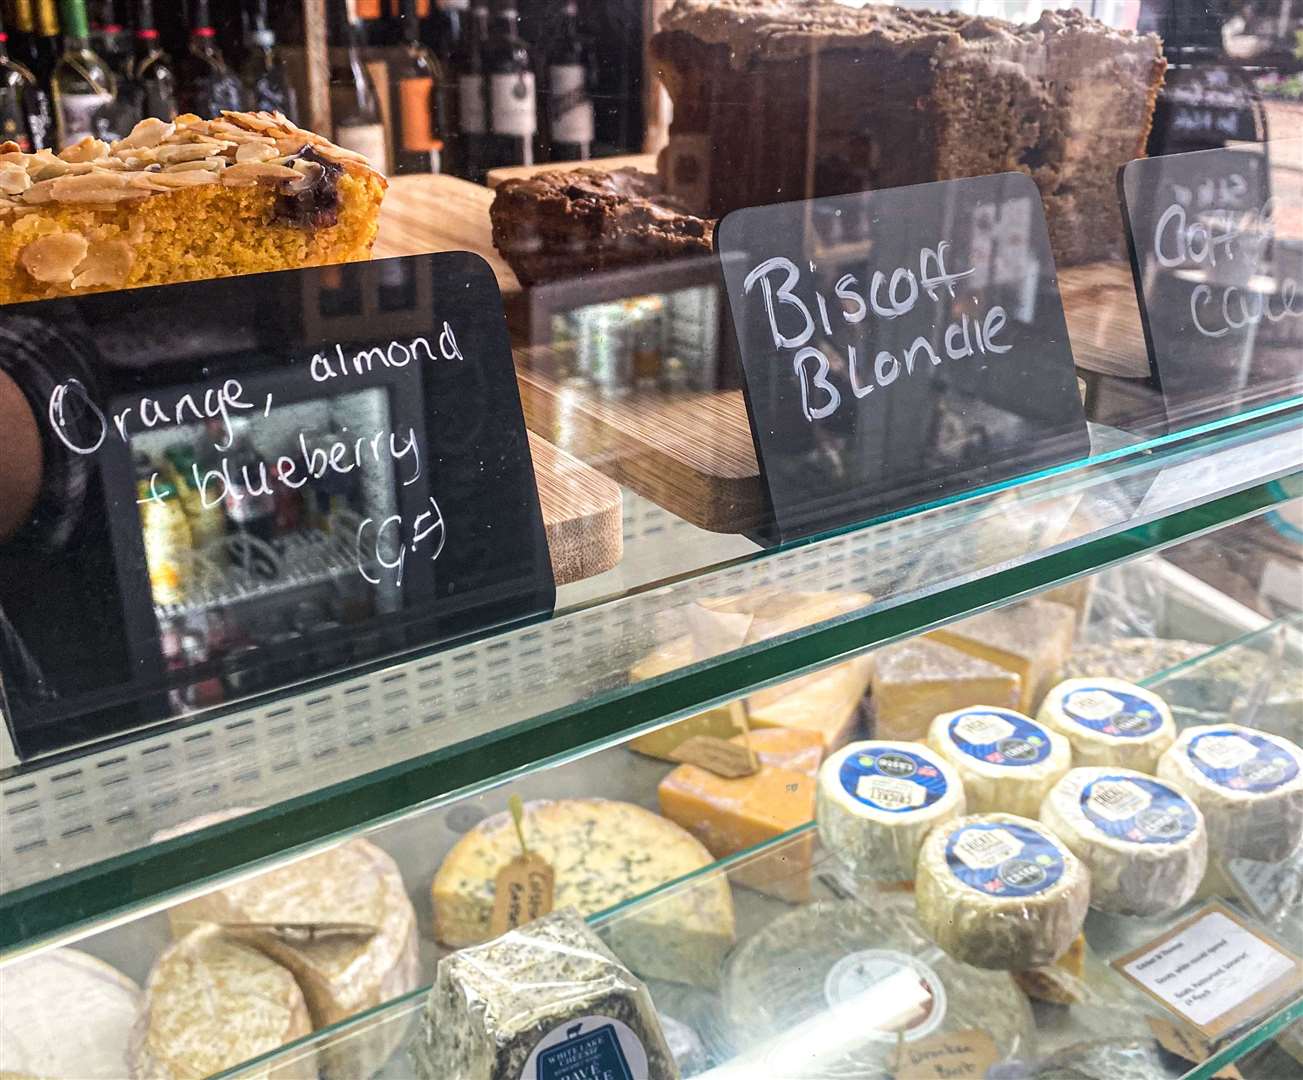 Sweet treats and artisan cheeses tempted me while I waited to order. Picture: Sam Lawrie